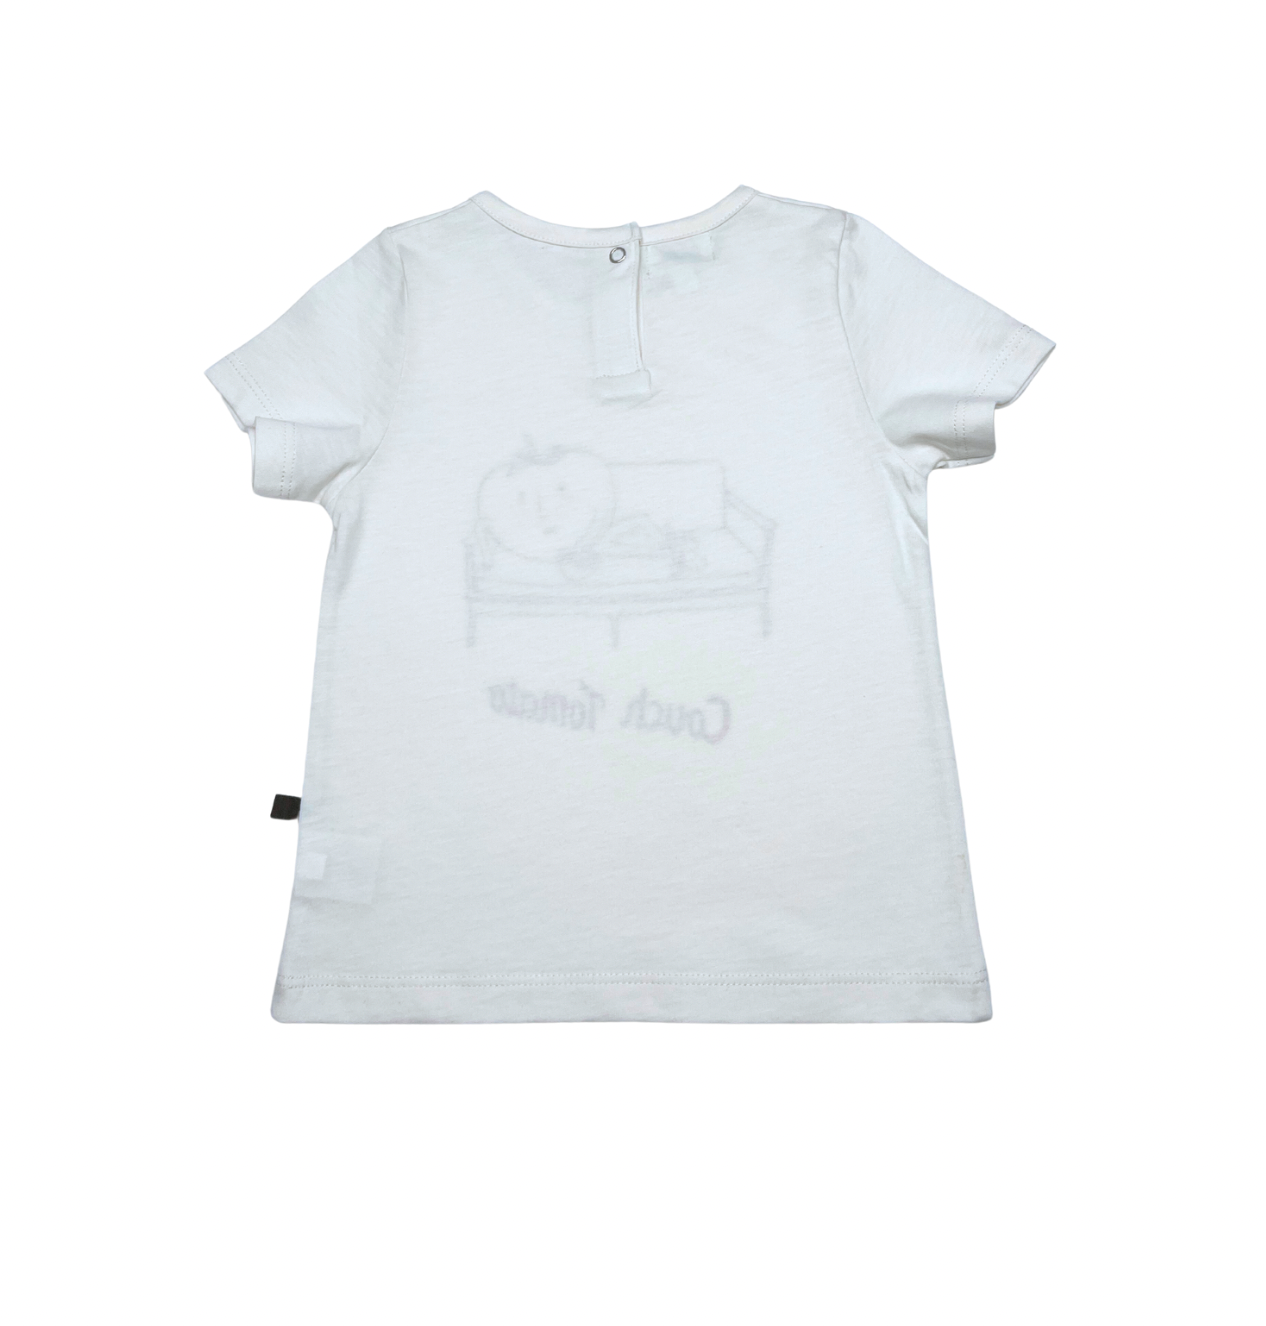 OEUF NYC - T-shirt "couch tomato" - 12 mois